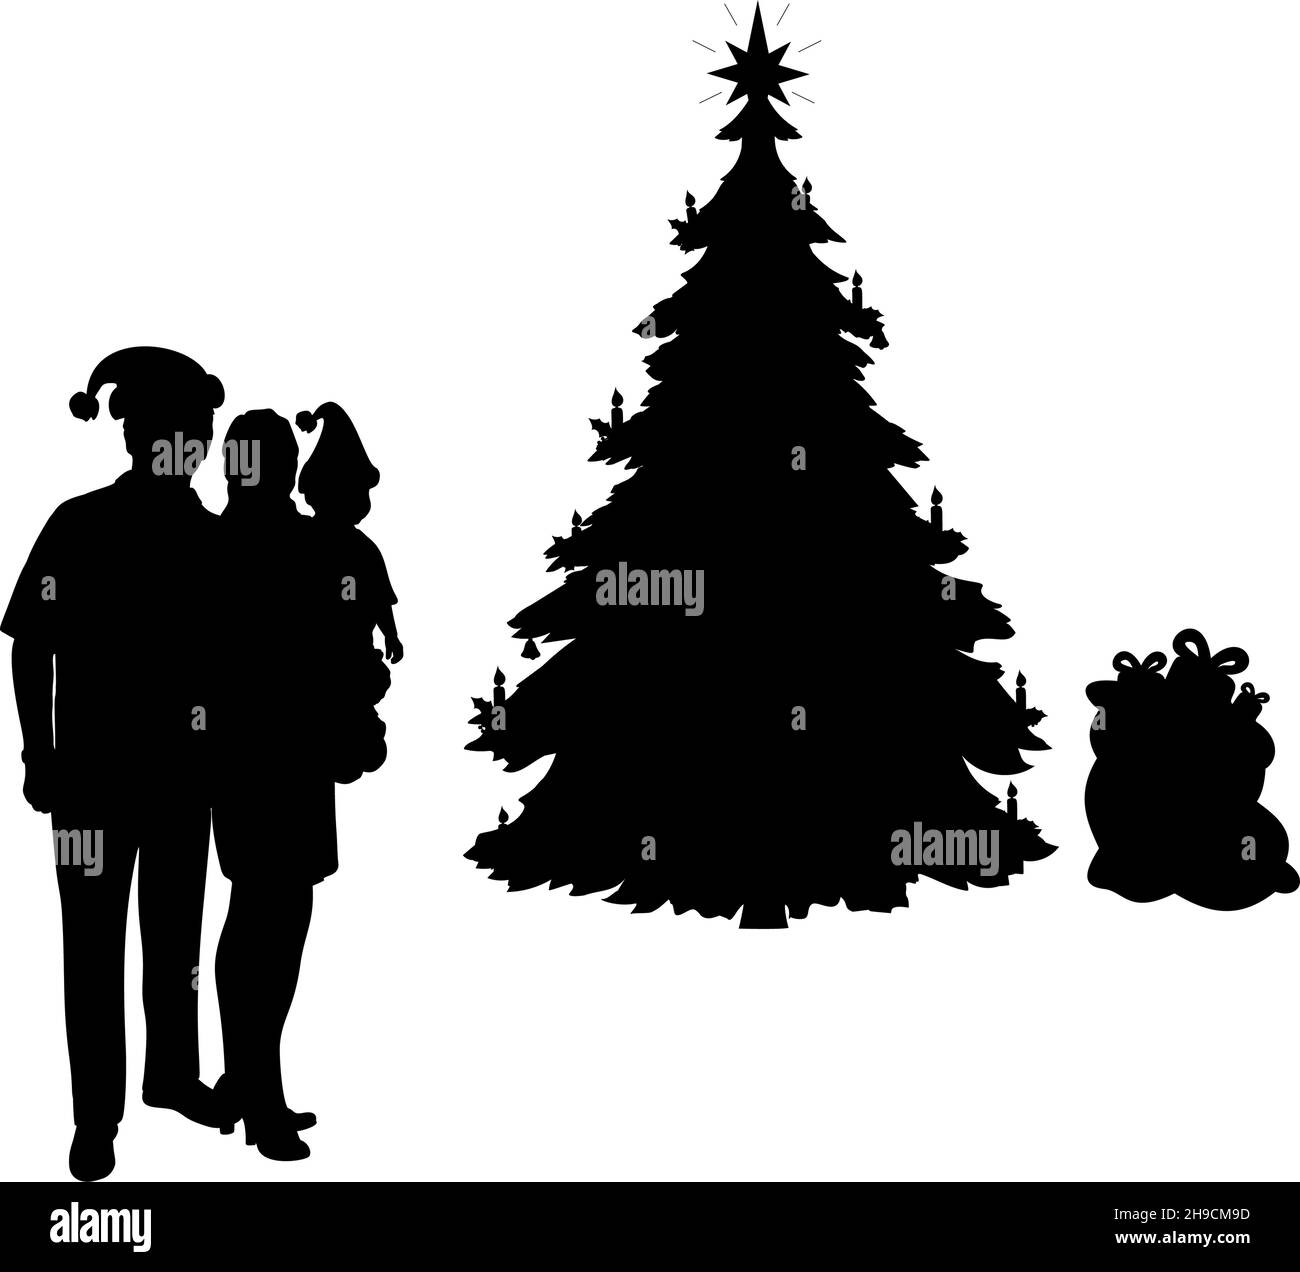 Silhouettes family by the Christmas tree. Happy New Year. Stock Vector